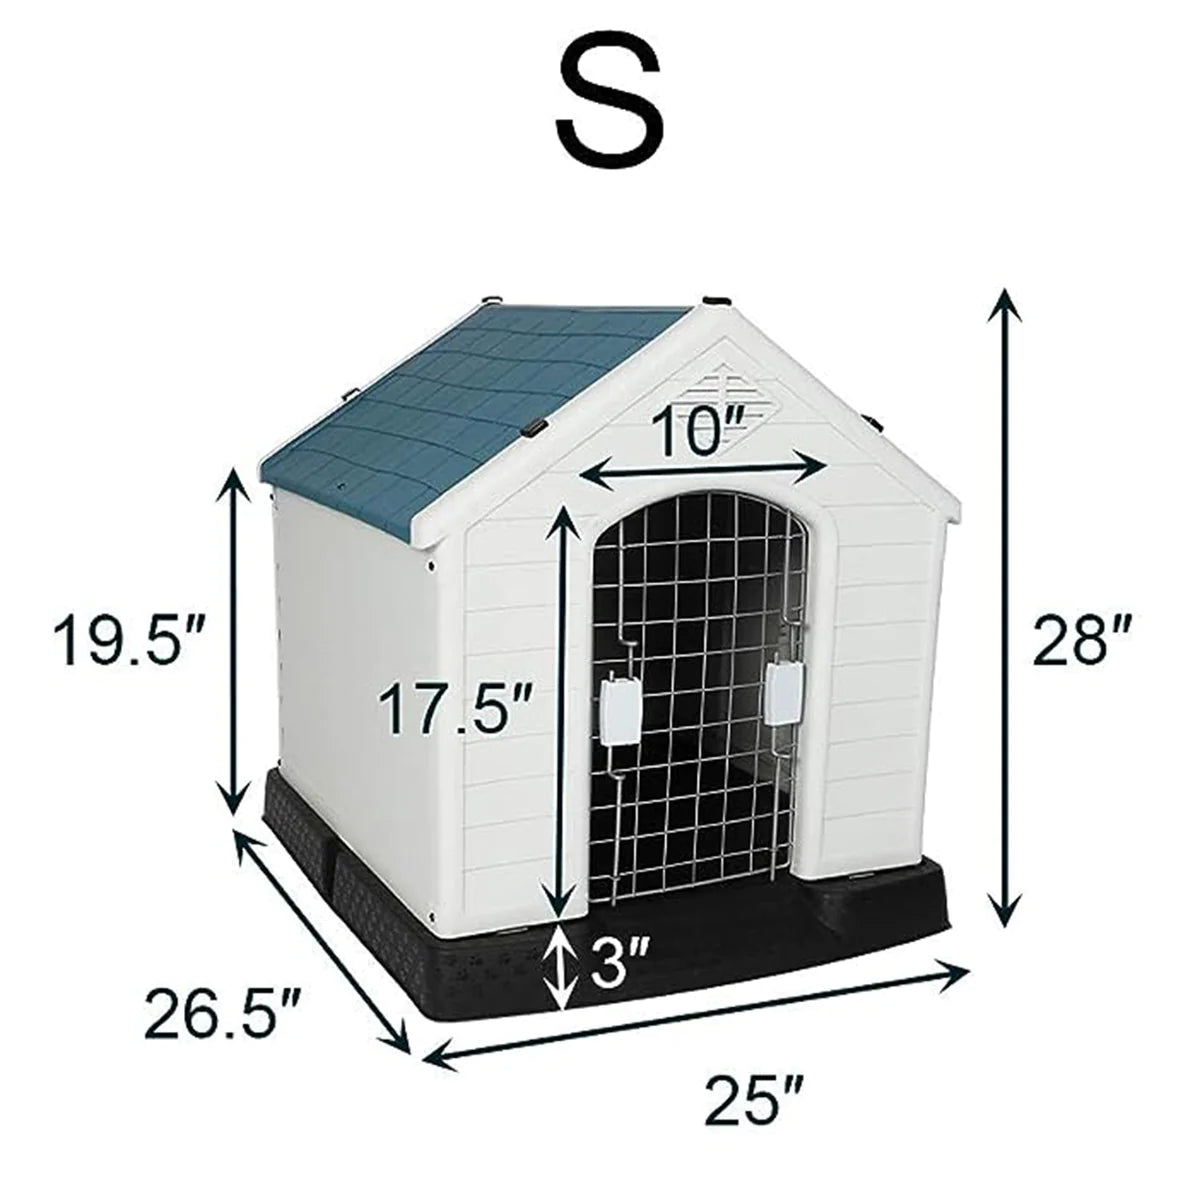 Outdoor Dog Houses Multiple Size Plastic Kennel with Mesh Iron Door, Blue and White